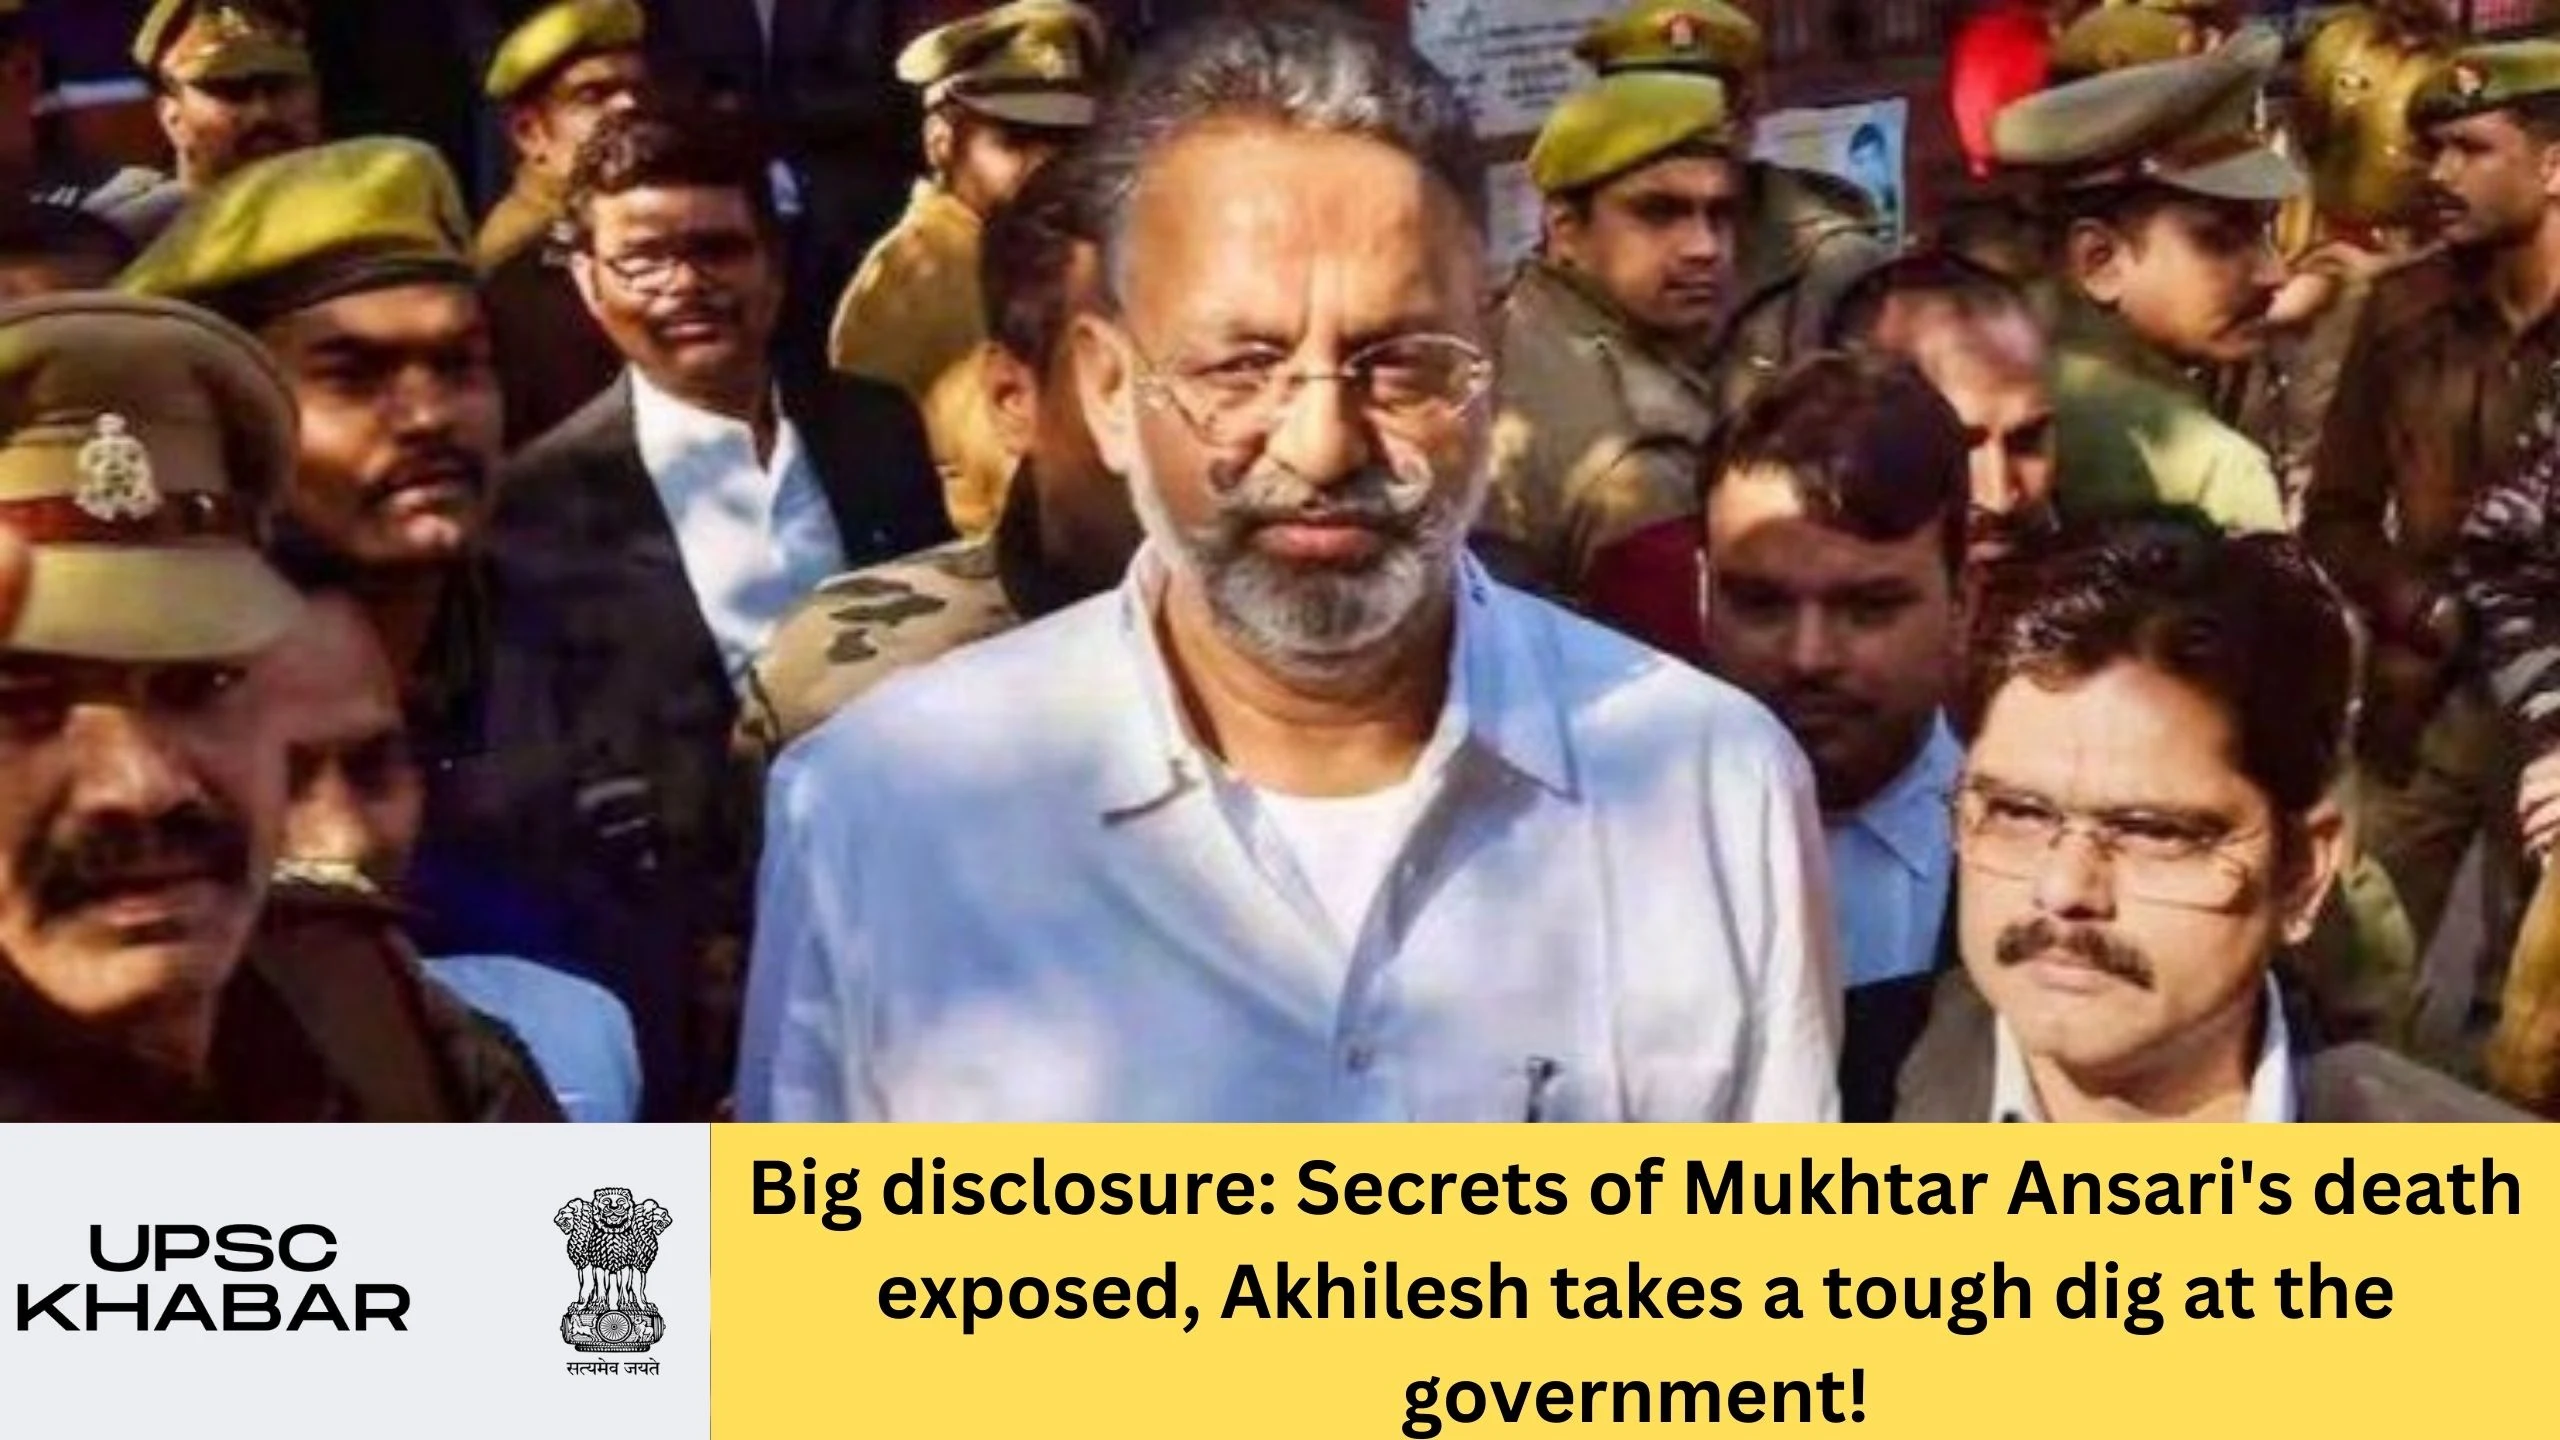 Big disclosure: Secrets of Mukhtar Ansari's death exposed, Akhilesh takes a tough dig at the government!